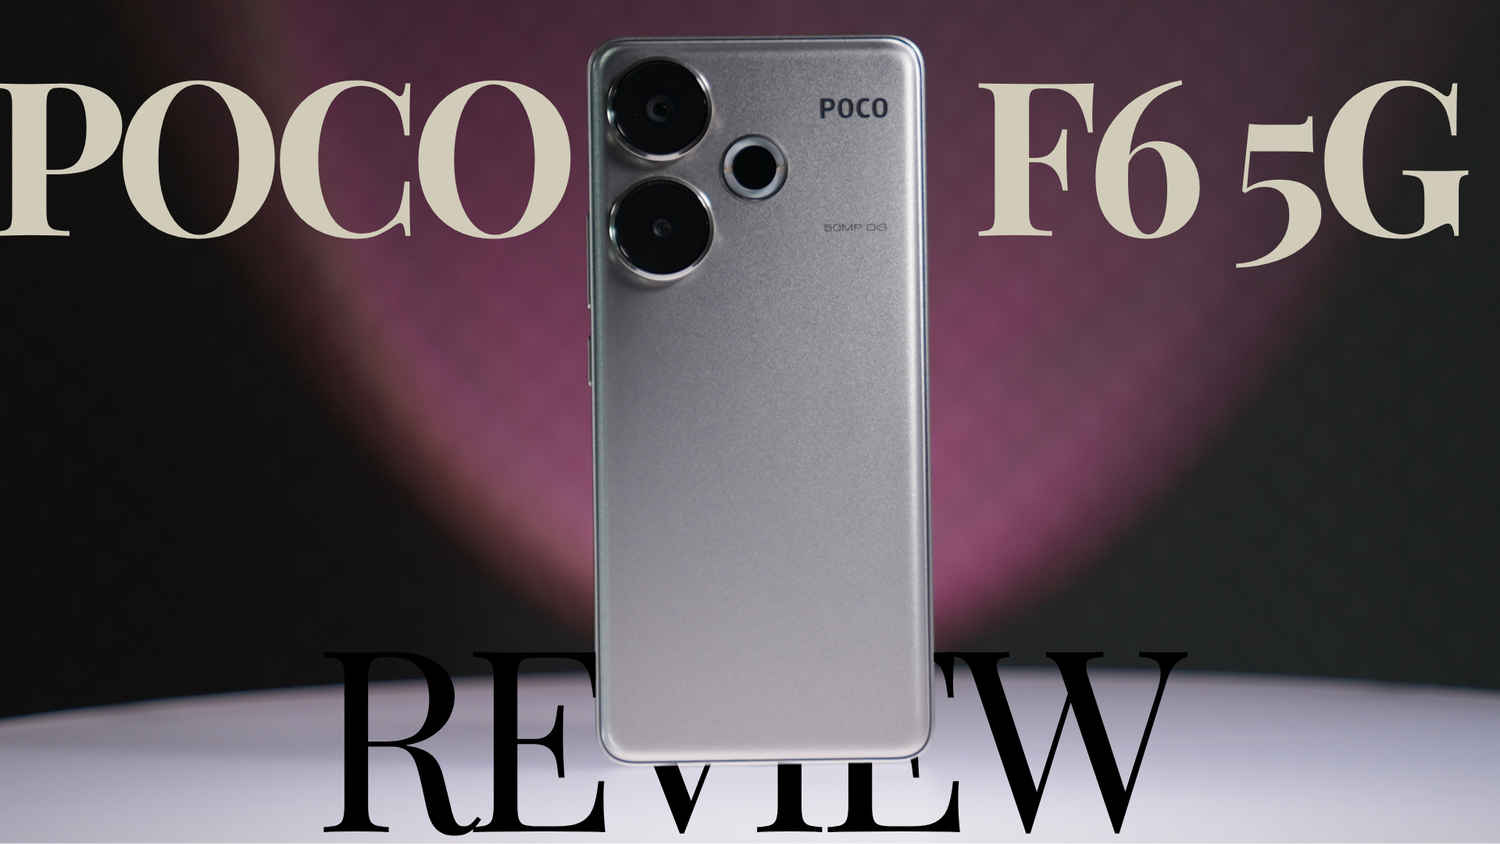 POCO F6 Review: More than just a gaming powerhouse